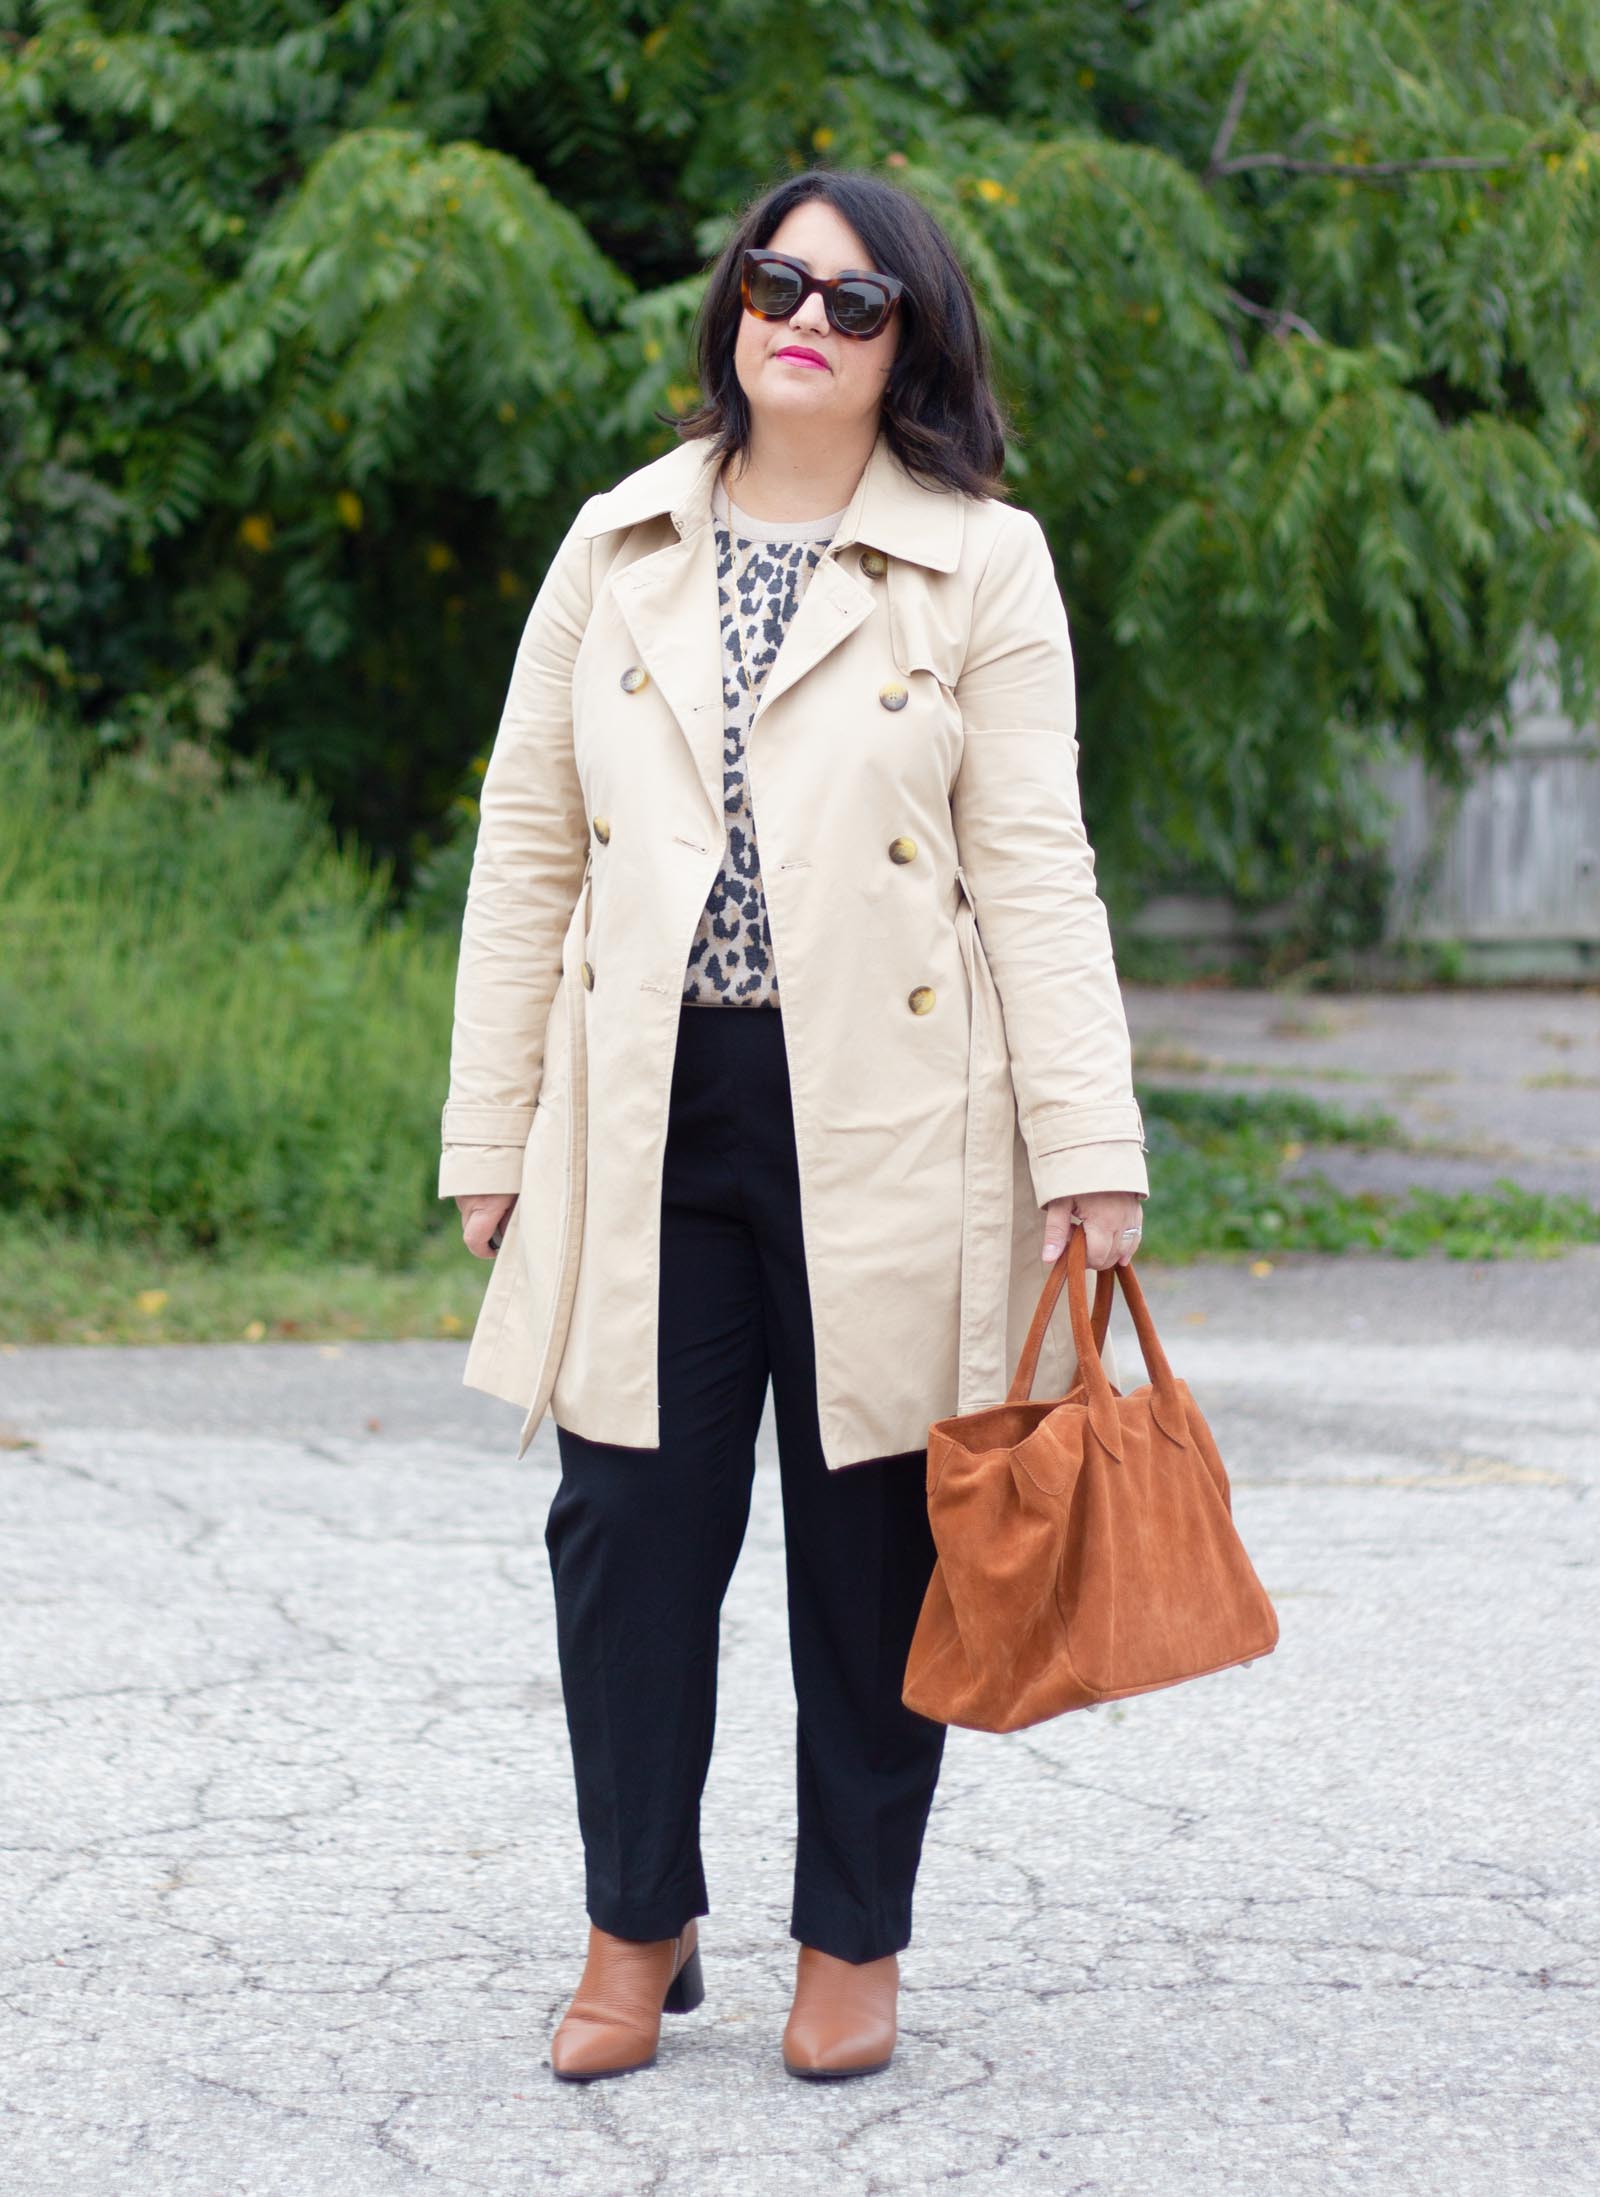 leopard sweater work outfit